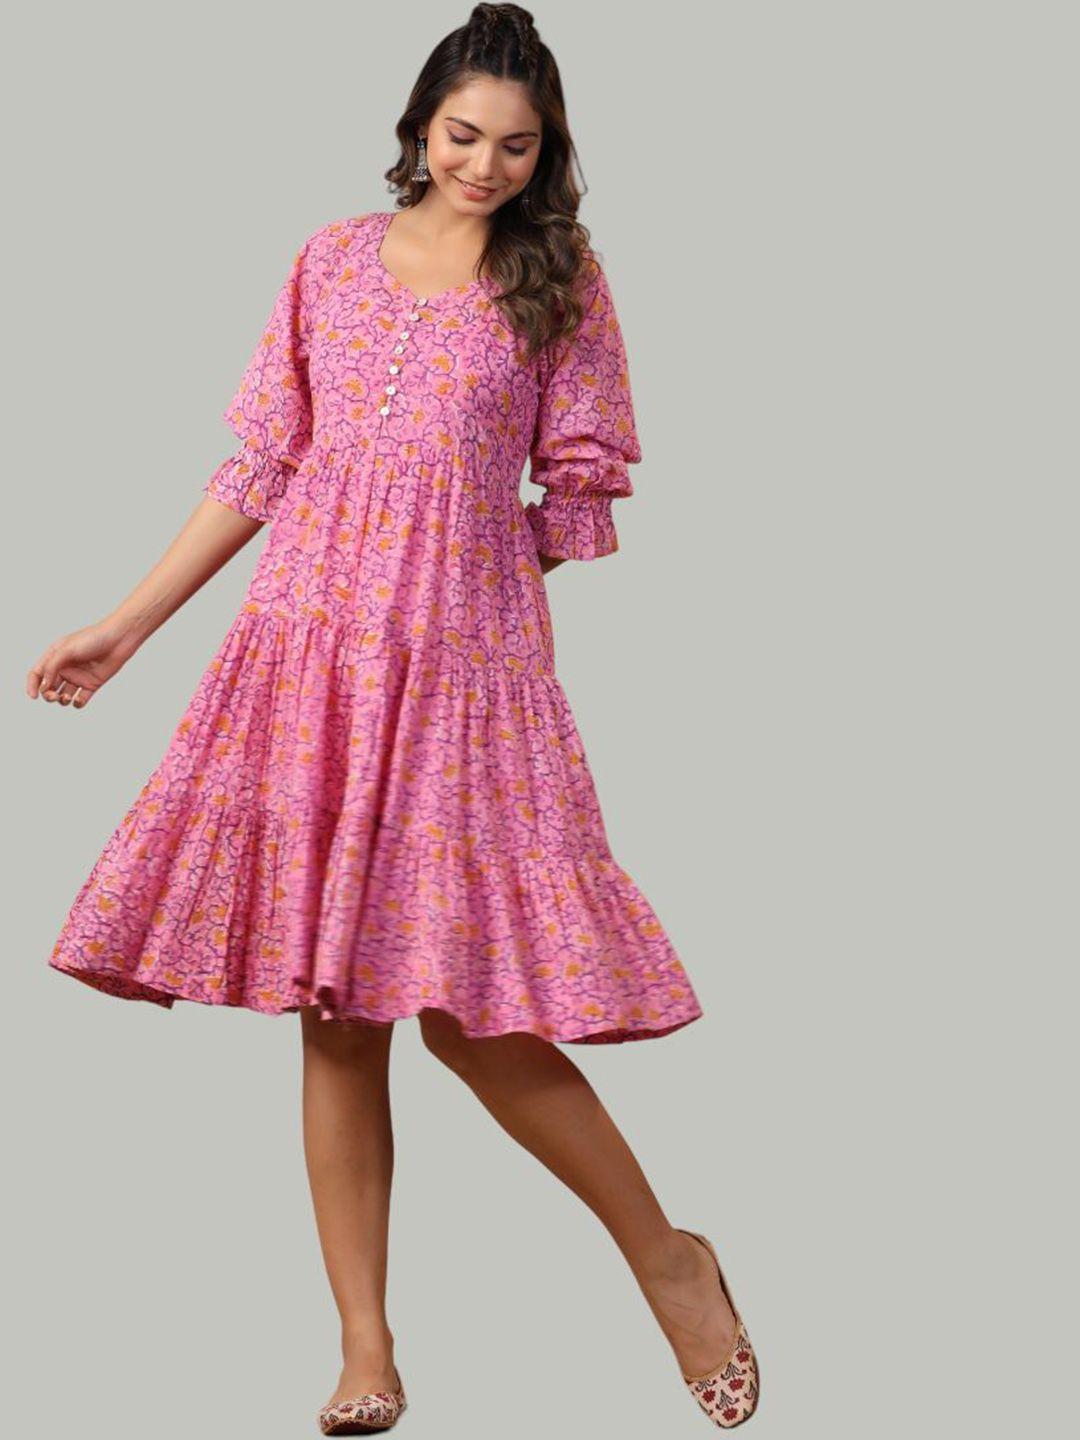 shuddhi floral printed v-neck cotton fit and flare ethnic dress